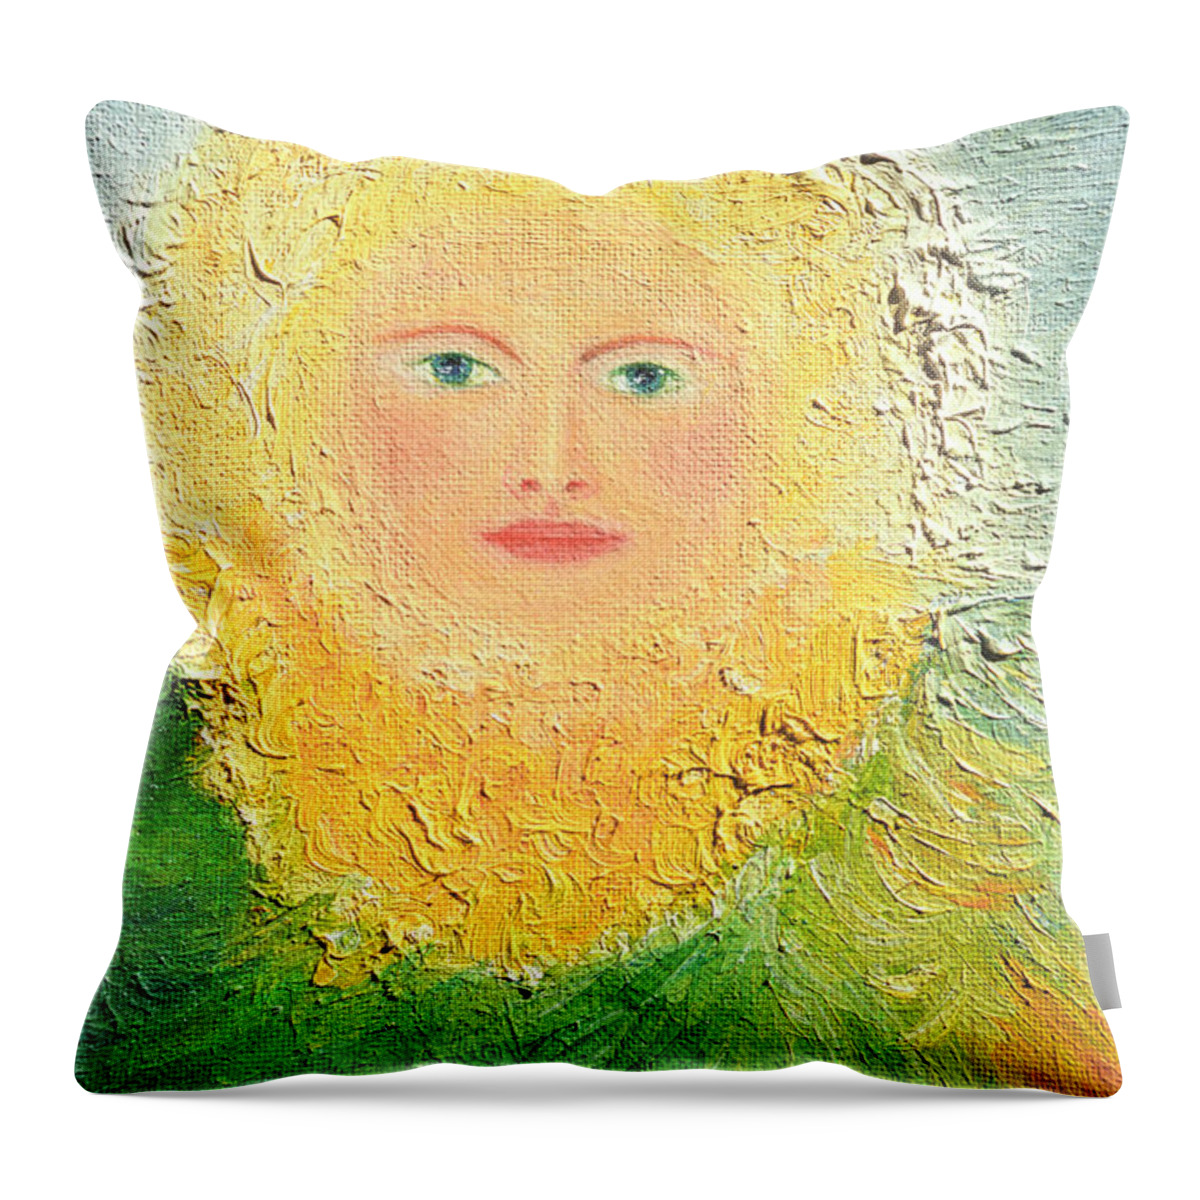 Sun Woman Throw Pillow featuring the painting Sun Woman by Judith Chantler